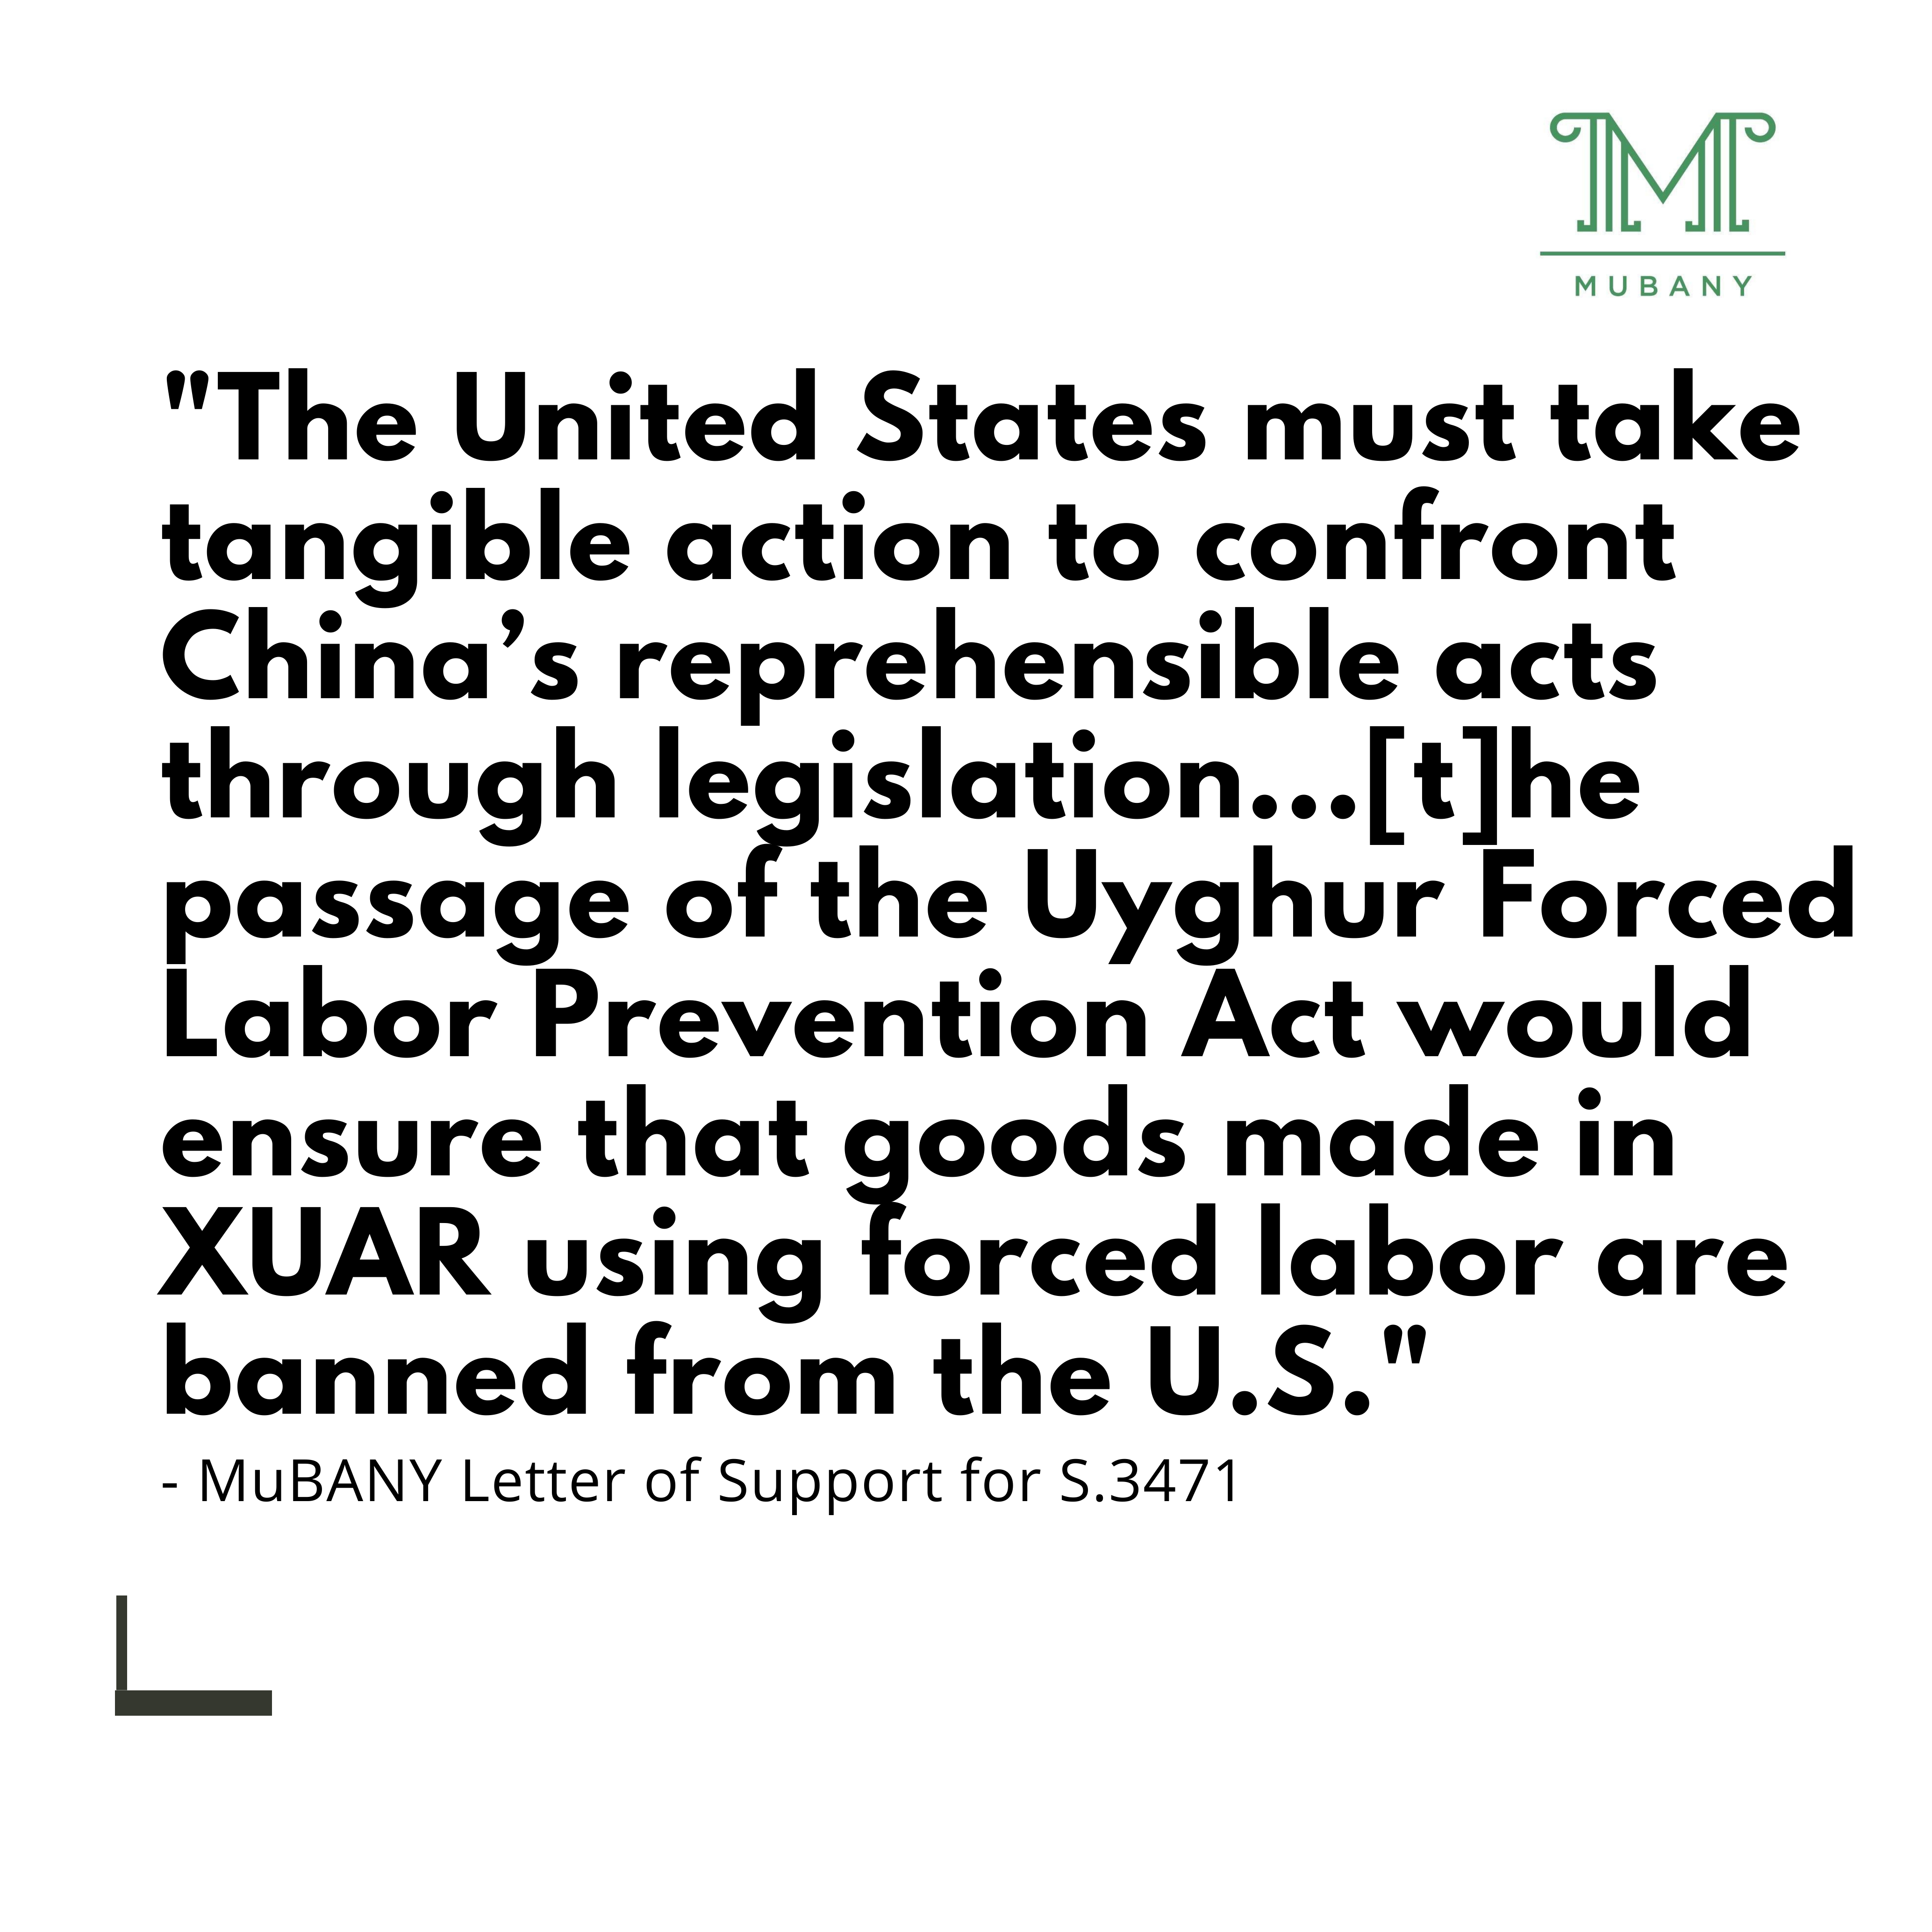 "The United States must take tangible action to confront China's reprehensible acts through legislation...[t]he passage of the Uyghur Forced Labor Prevention Act would ensure that goods made in XUAR using forced labor are banned from the U.S."